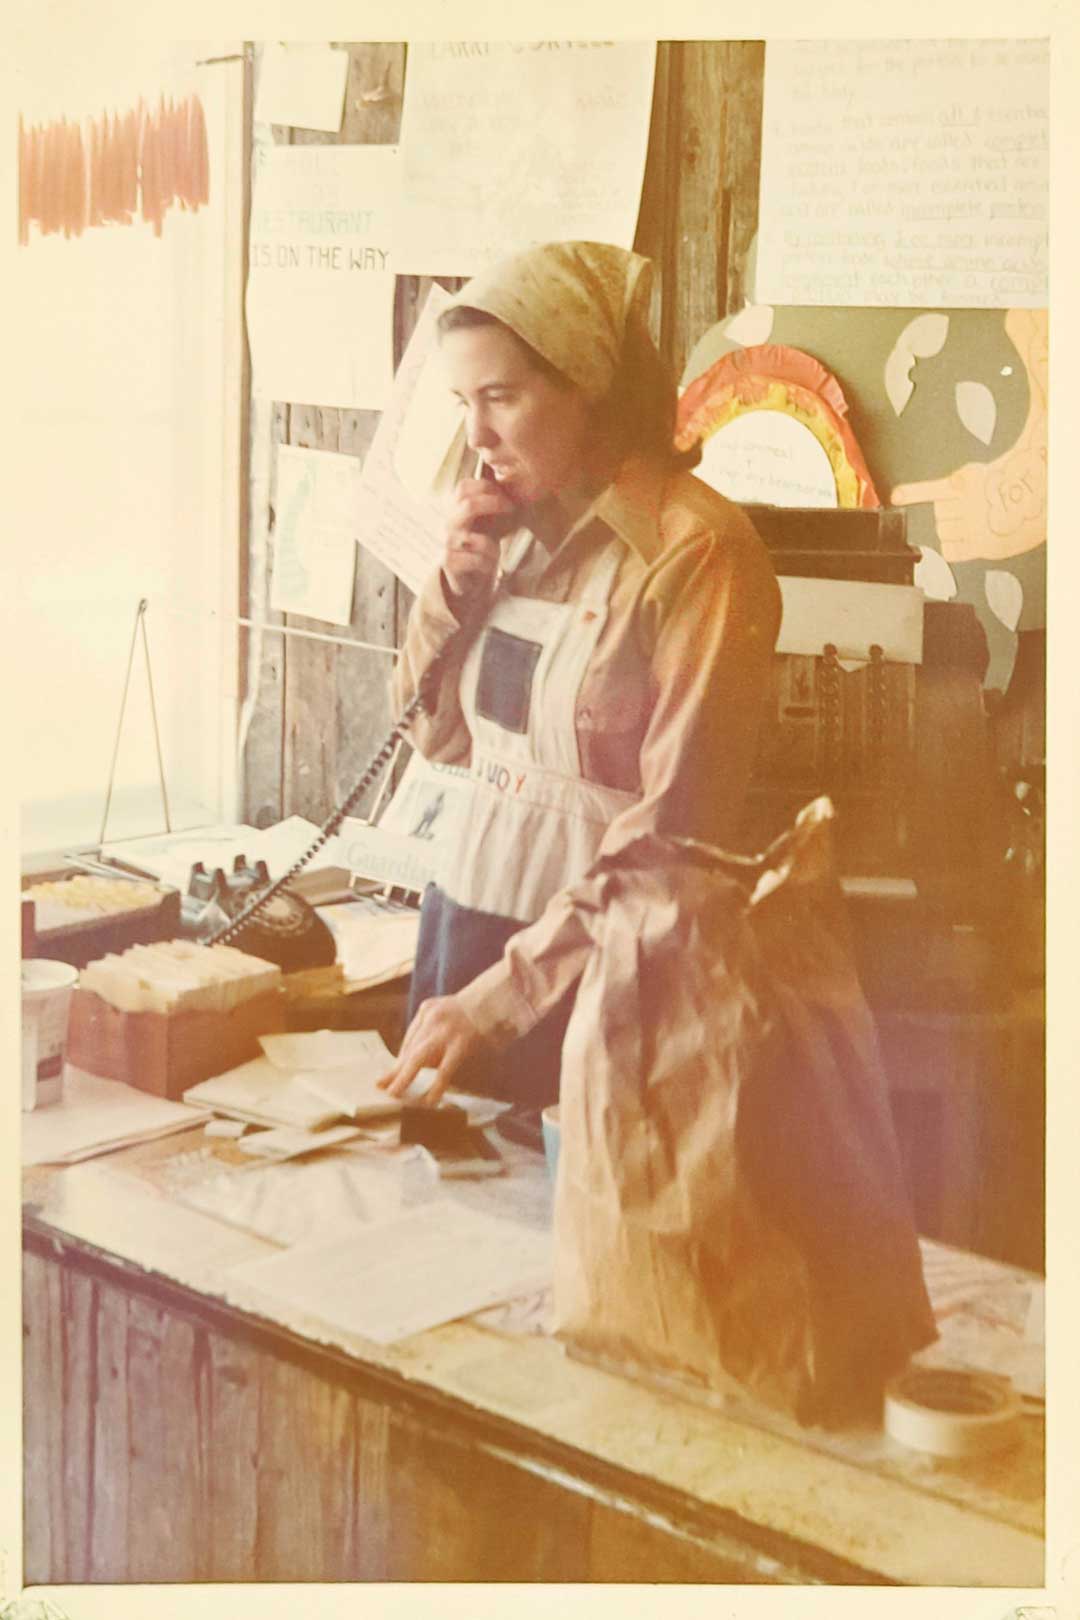 A person wearing a headscarf and apron stands at a wooden counter, speaking on a rotary phone. The counter has a brown paper bag, papers, and a cash register. In the background of this Whole Foods Coop in Duluth MN, posters adorn the walls while natural light streams through the window.